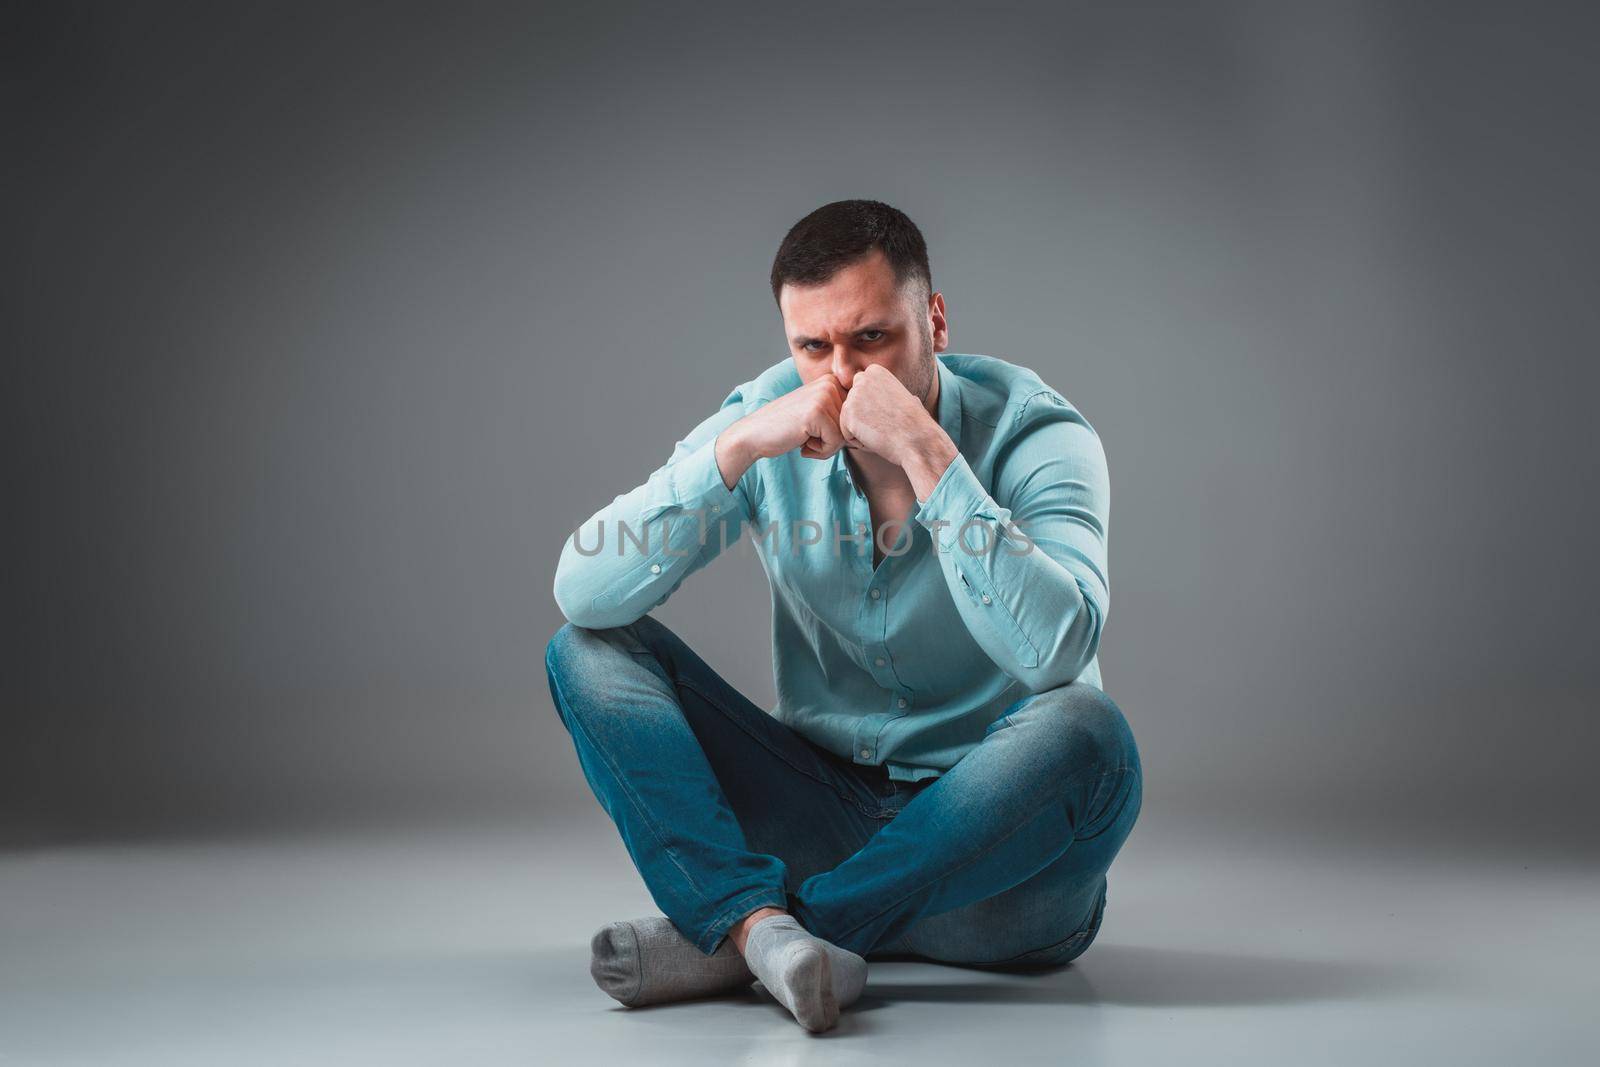 The man is sitting on the floor, isolated on gray background. Man showing different emotions. A man is dressed in blue jeans and a shirt